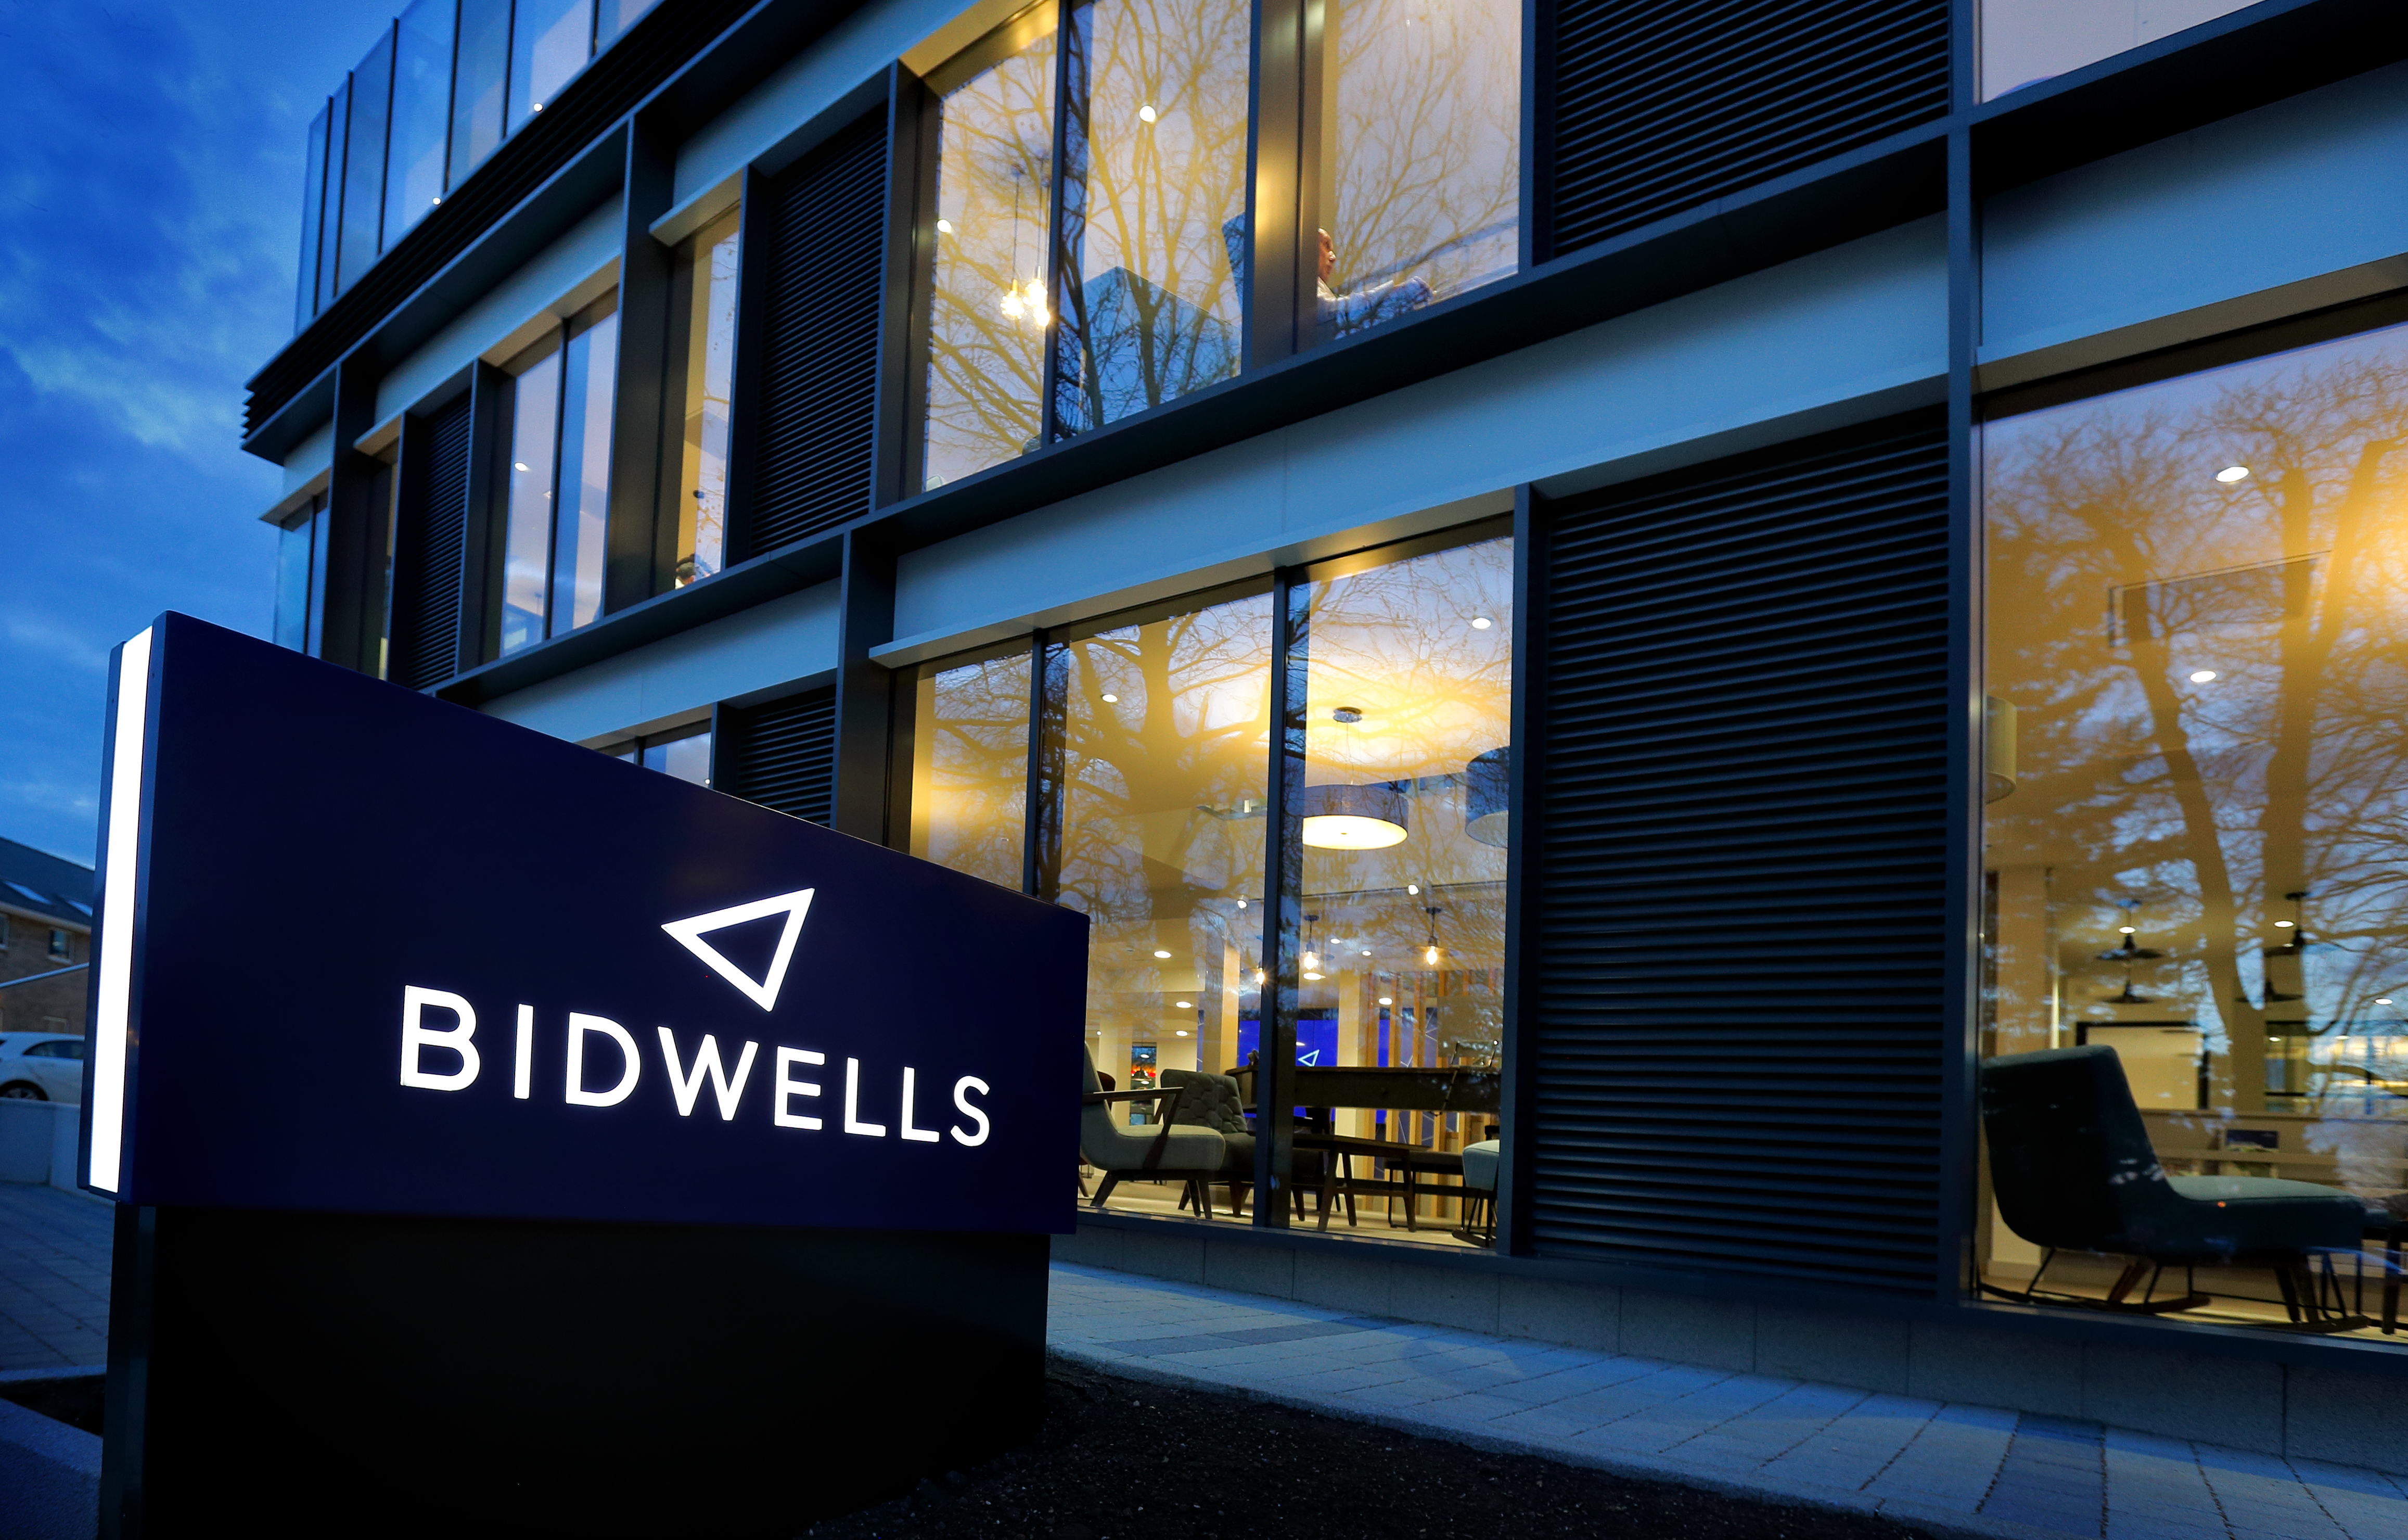 New Bidwells Senior Partner Taking The Reins After Record Year Of Oxford-Cambridge Arc Investment